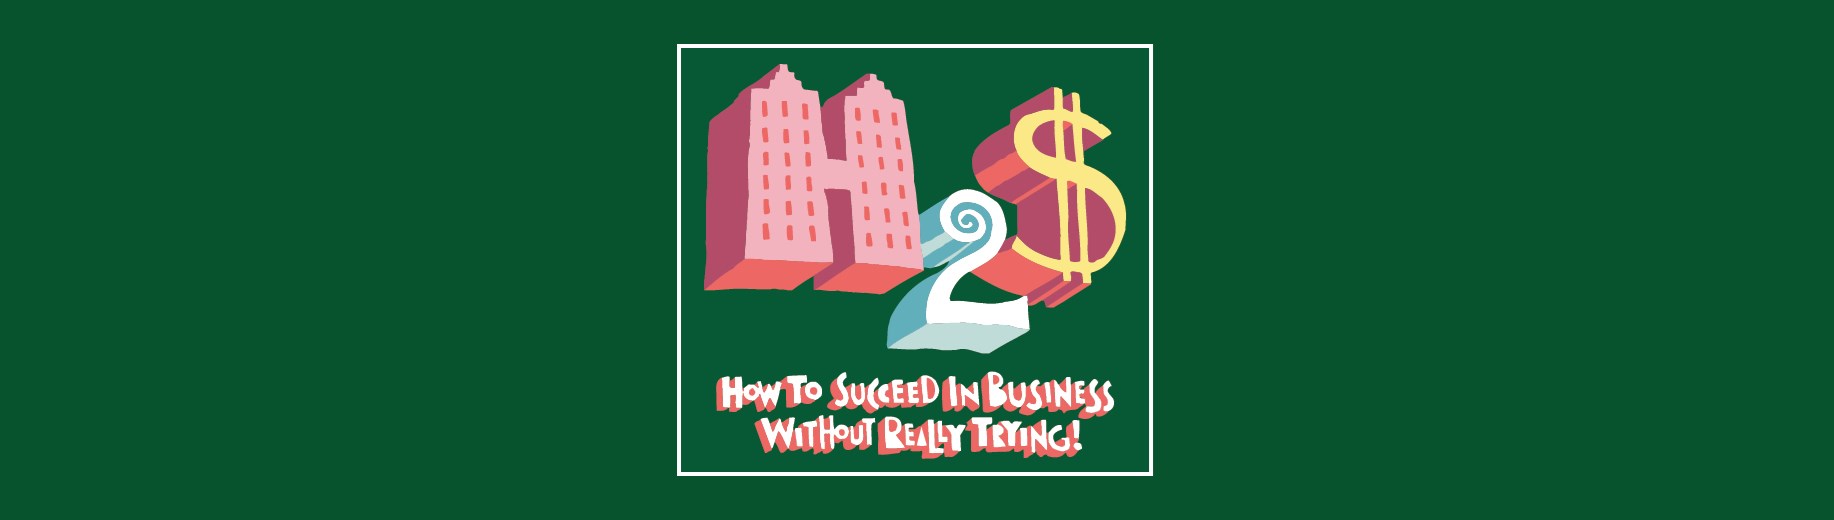 HOW TO SUCCEED IN BUSINESS WITHOUT REALLY TRYING